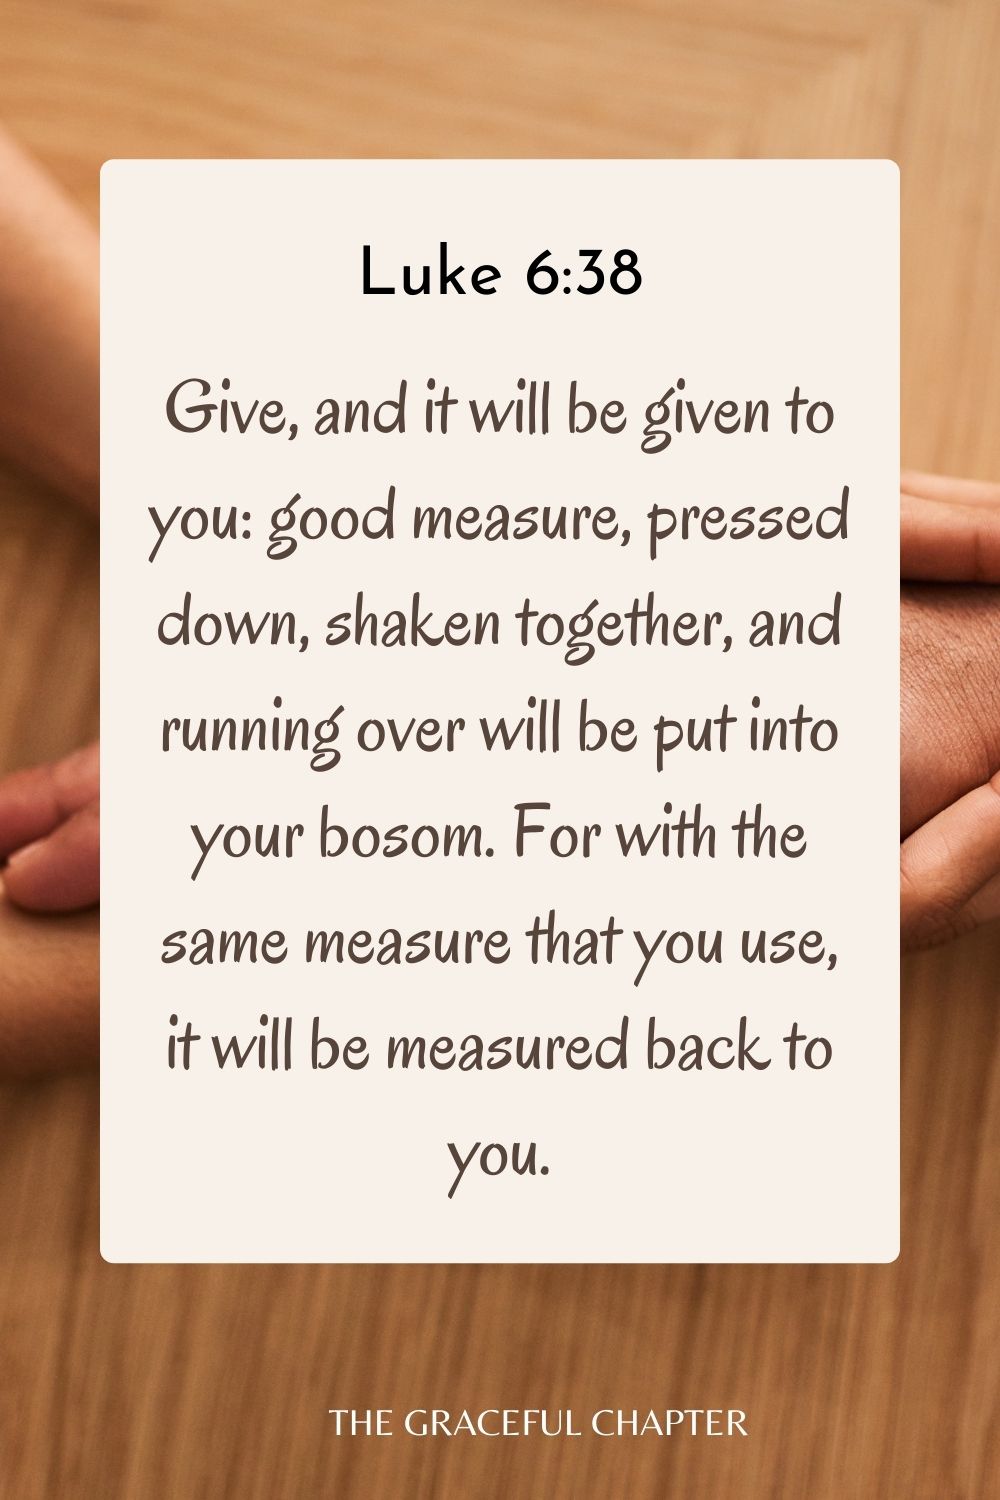 Give, and it will be given to you: good measure, pressed down, shaken together, and running over will be put into your bosom. For with the same measure that you use, it will be measured back to you. Luke 6:38